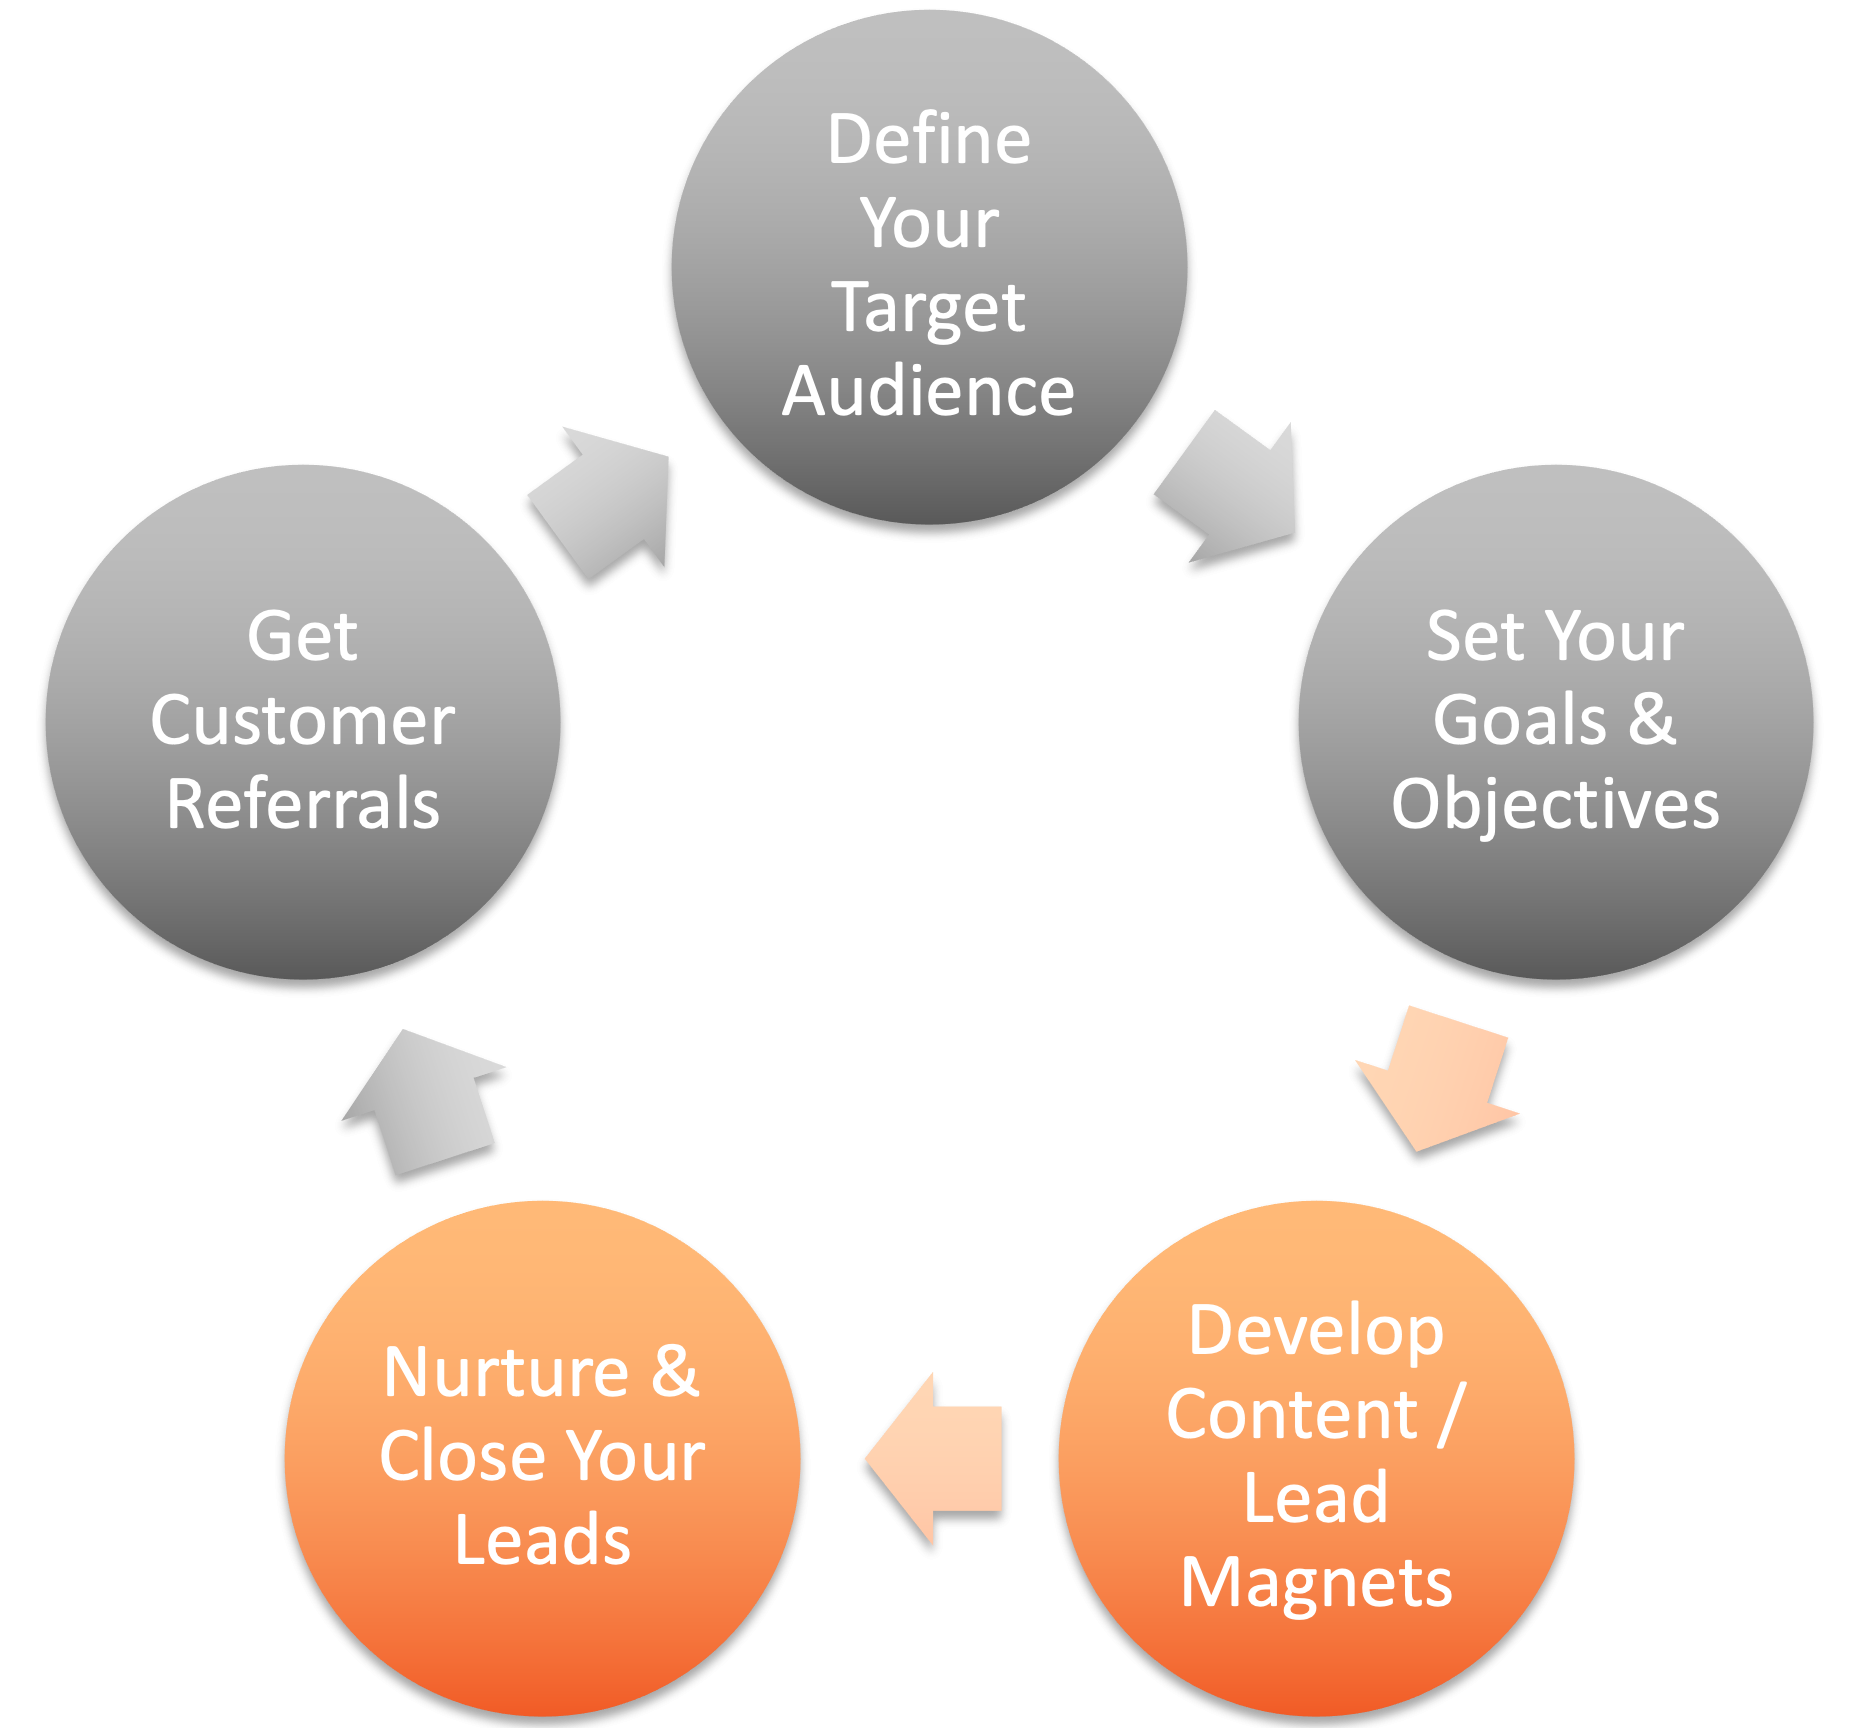 Define your target audience, set your goals & objectives, develop content/lead magnets, nuture & close your leads, get customer referrals.